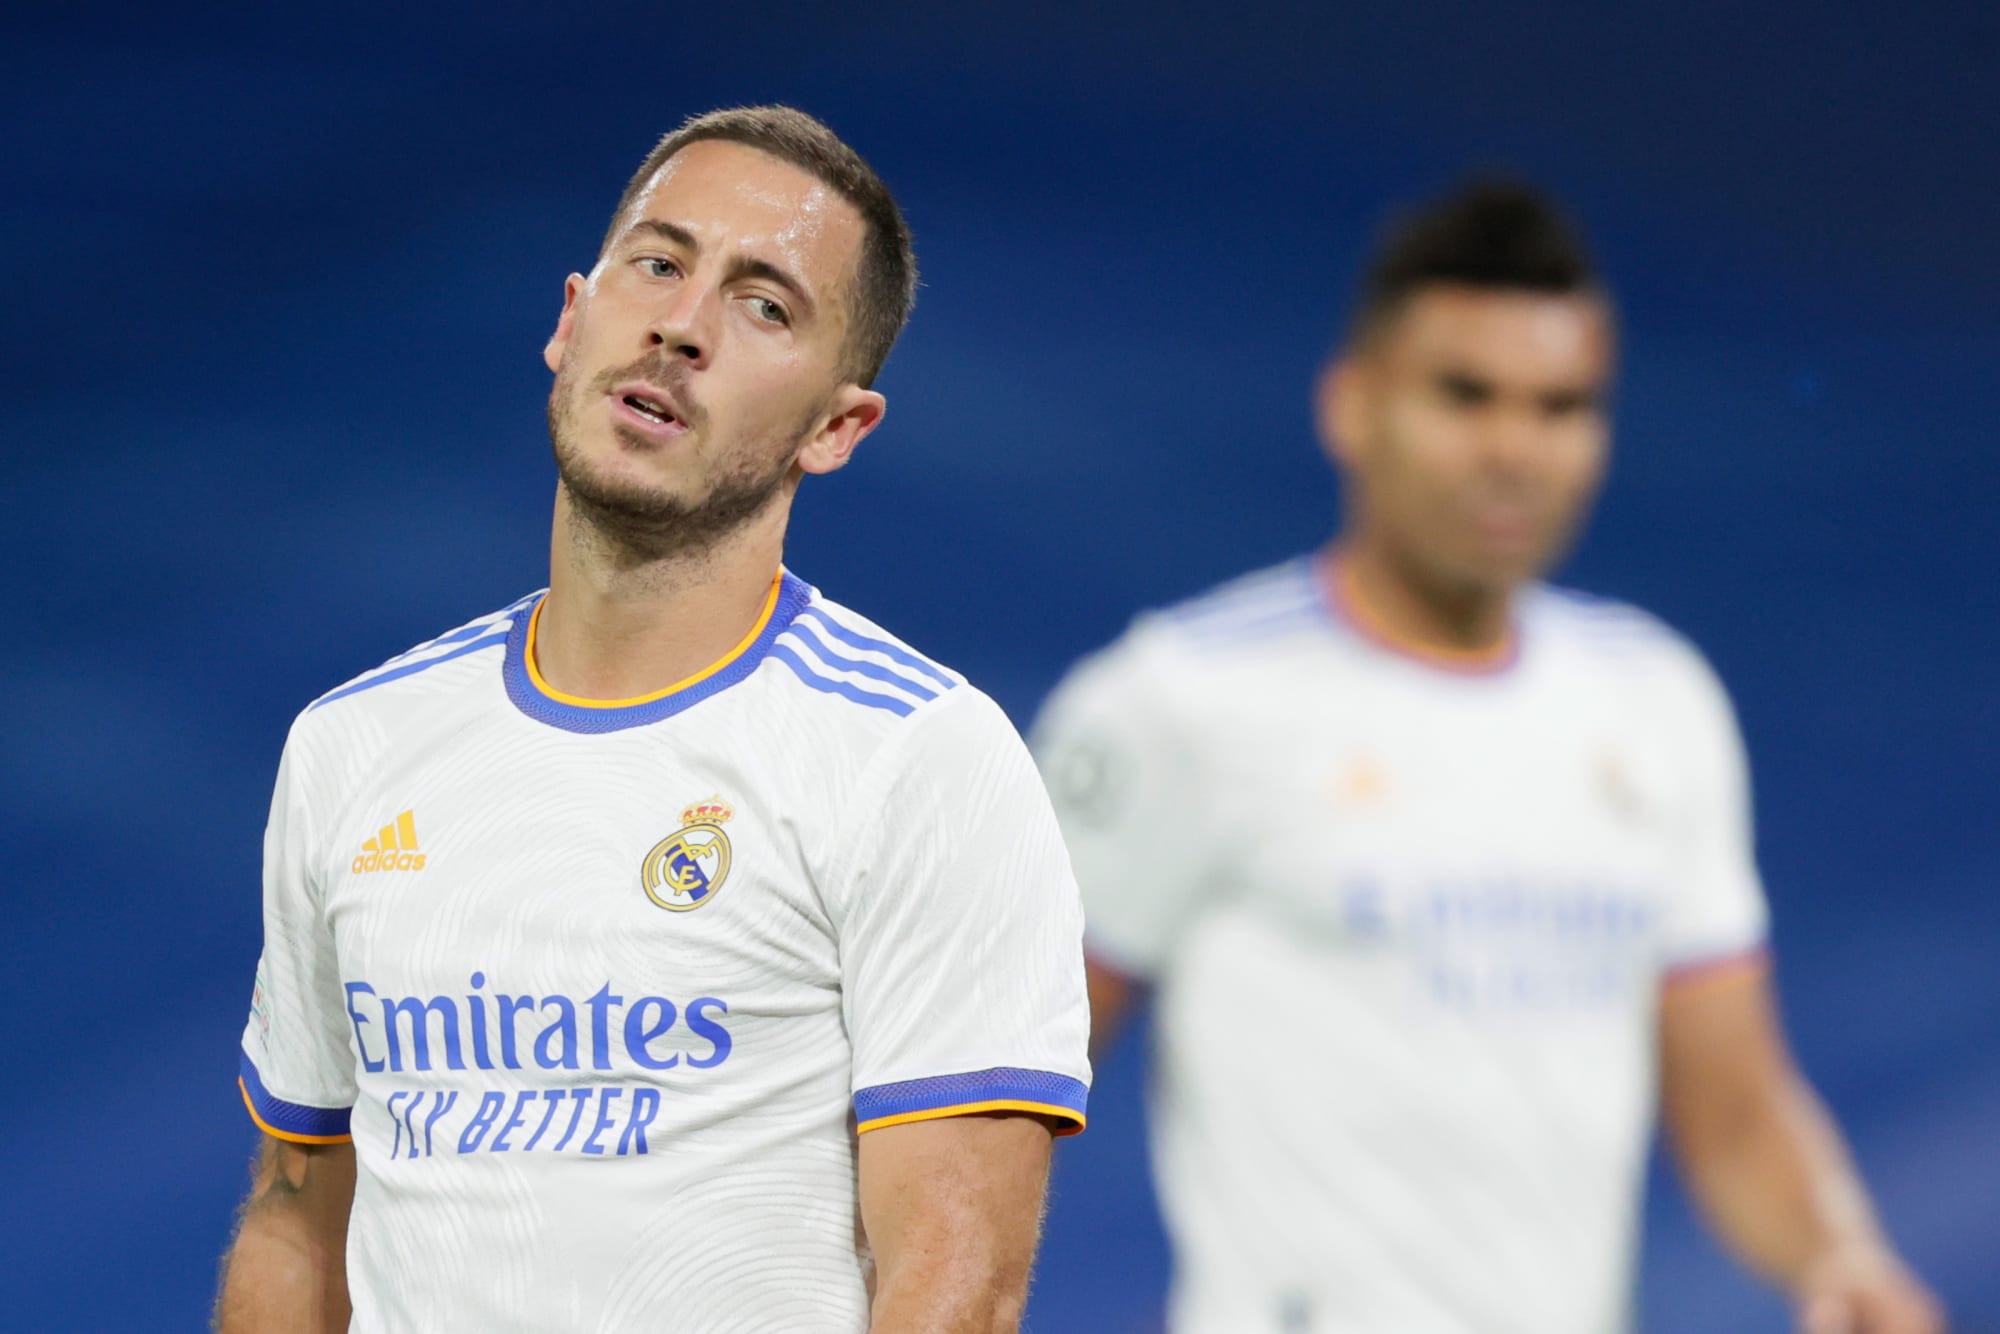 Eden Hazard's wages at Real Madrid: How much of a burden is his salary?